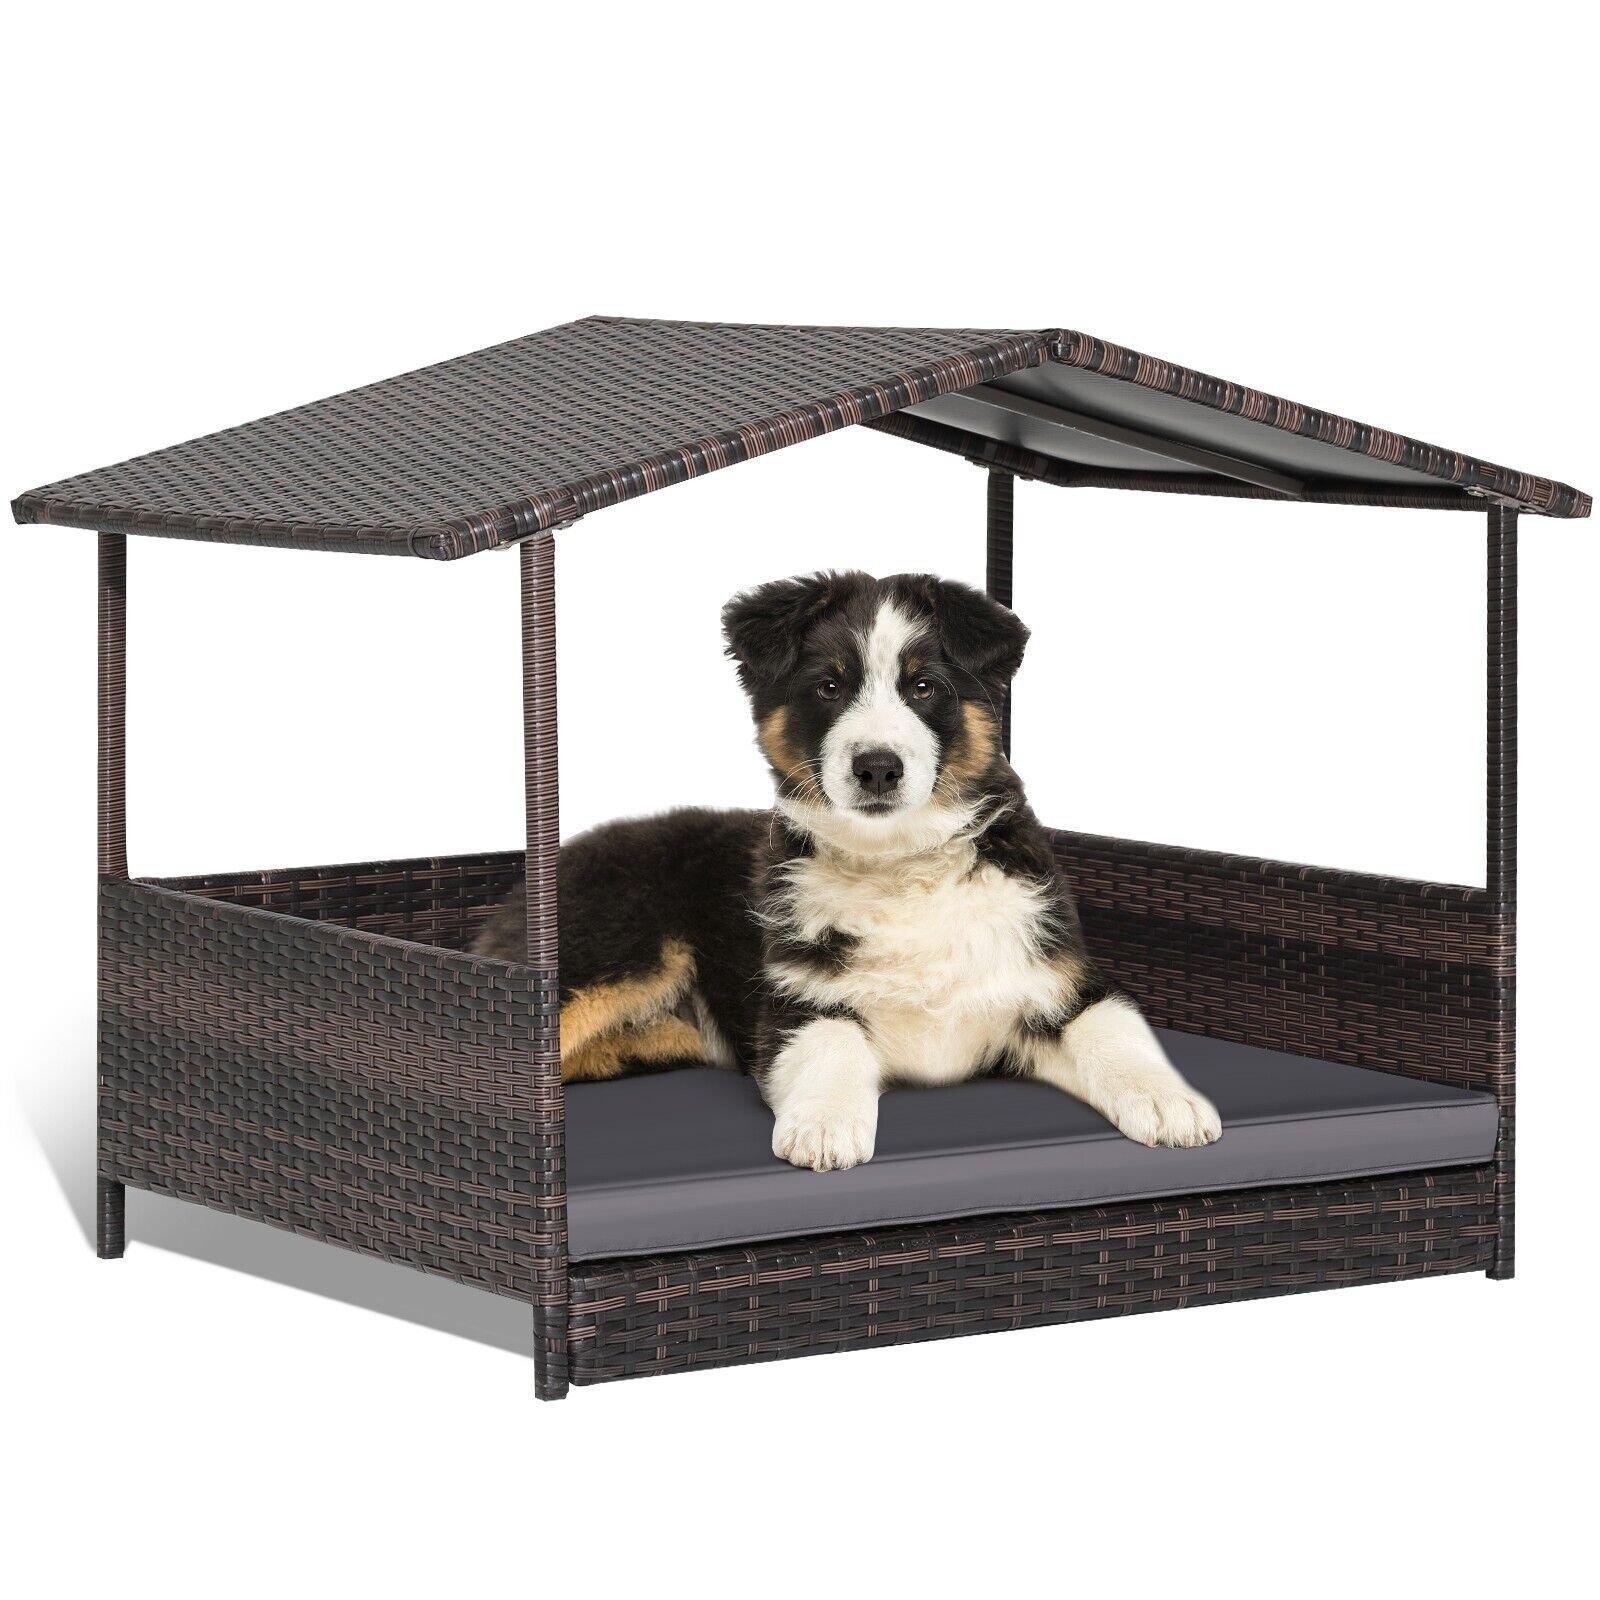 Wicker Dog House Raised PE Rattan Dog Bed With Roof & Detachable Soft Cushion